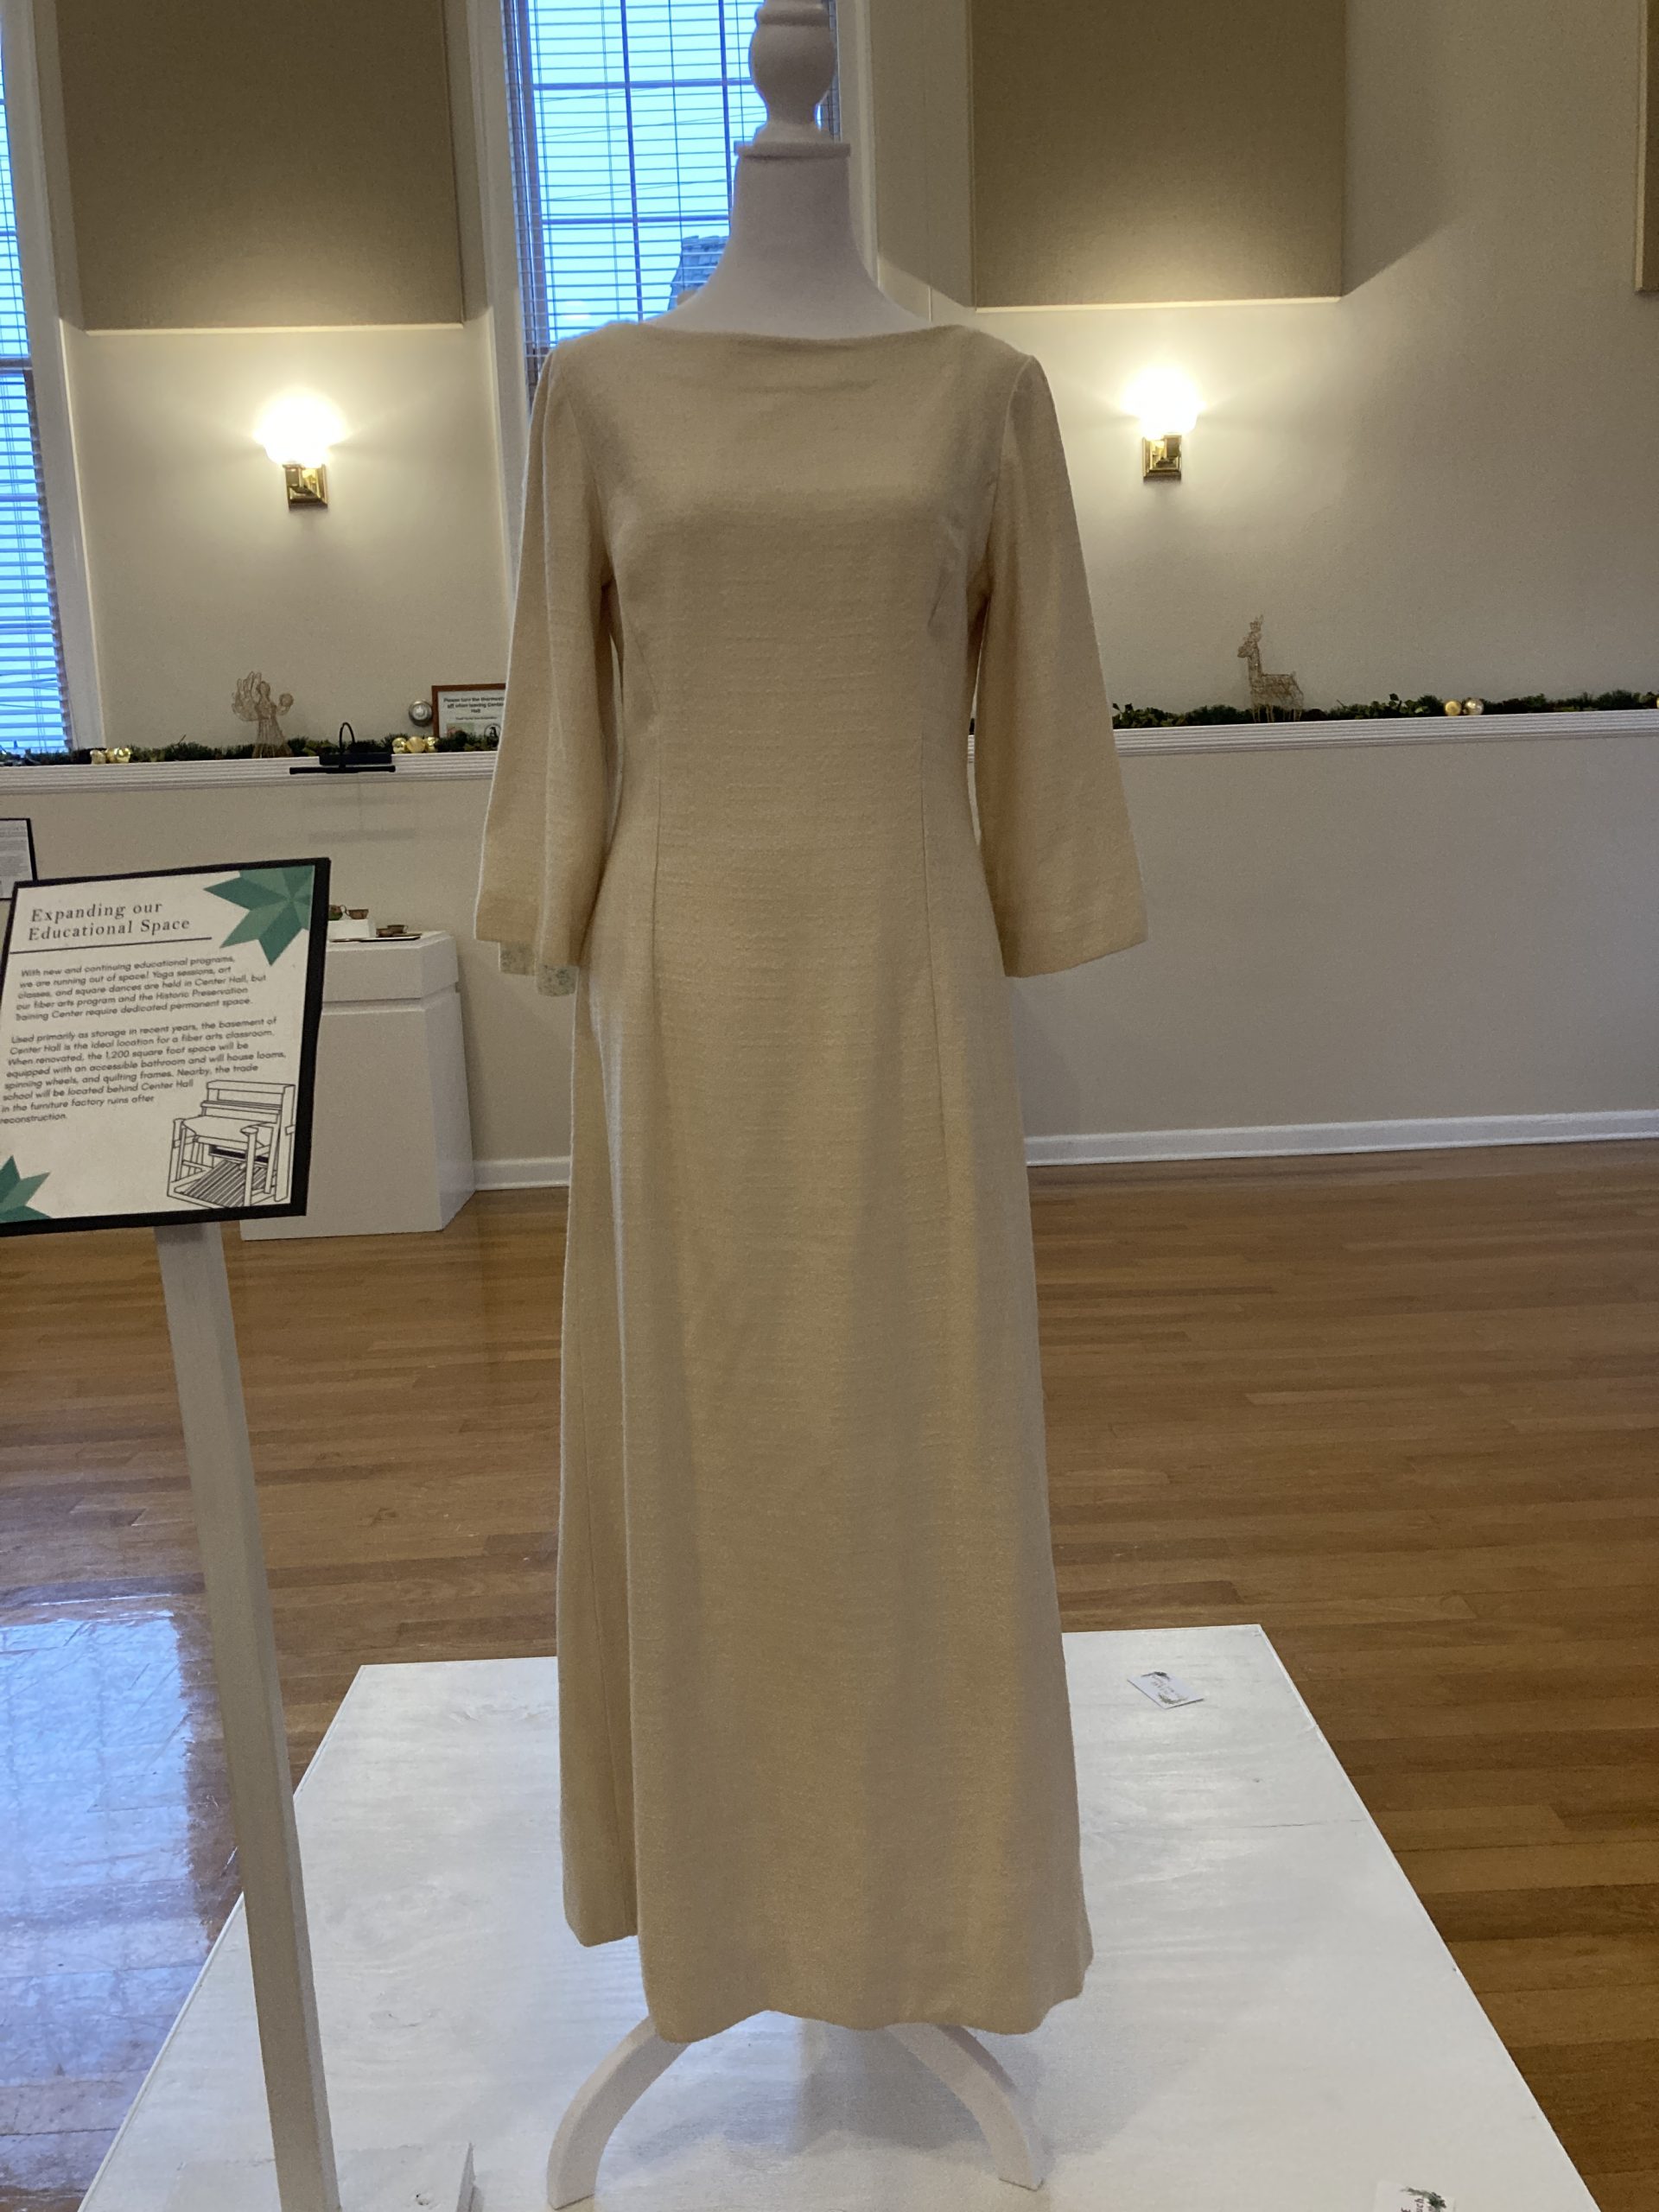 Wedding Dress
Barbra Dorothy Mayor Thompson
1968

Master weaver and homesteader descendant Barbra “Dorothy” Mayor Thompson created this wedding dress for her daughter Sarah in 1968. Using a summer-winter weave, Thompson wove the fabric then cut pieces from a pattern, finally sewing the entire dress together. Even the buttons on the back are covered with woven material.

On loan from Sarah Thompson Fletcher
2022.30L.01